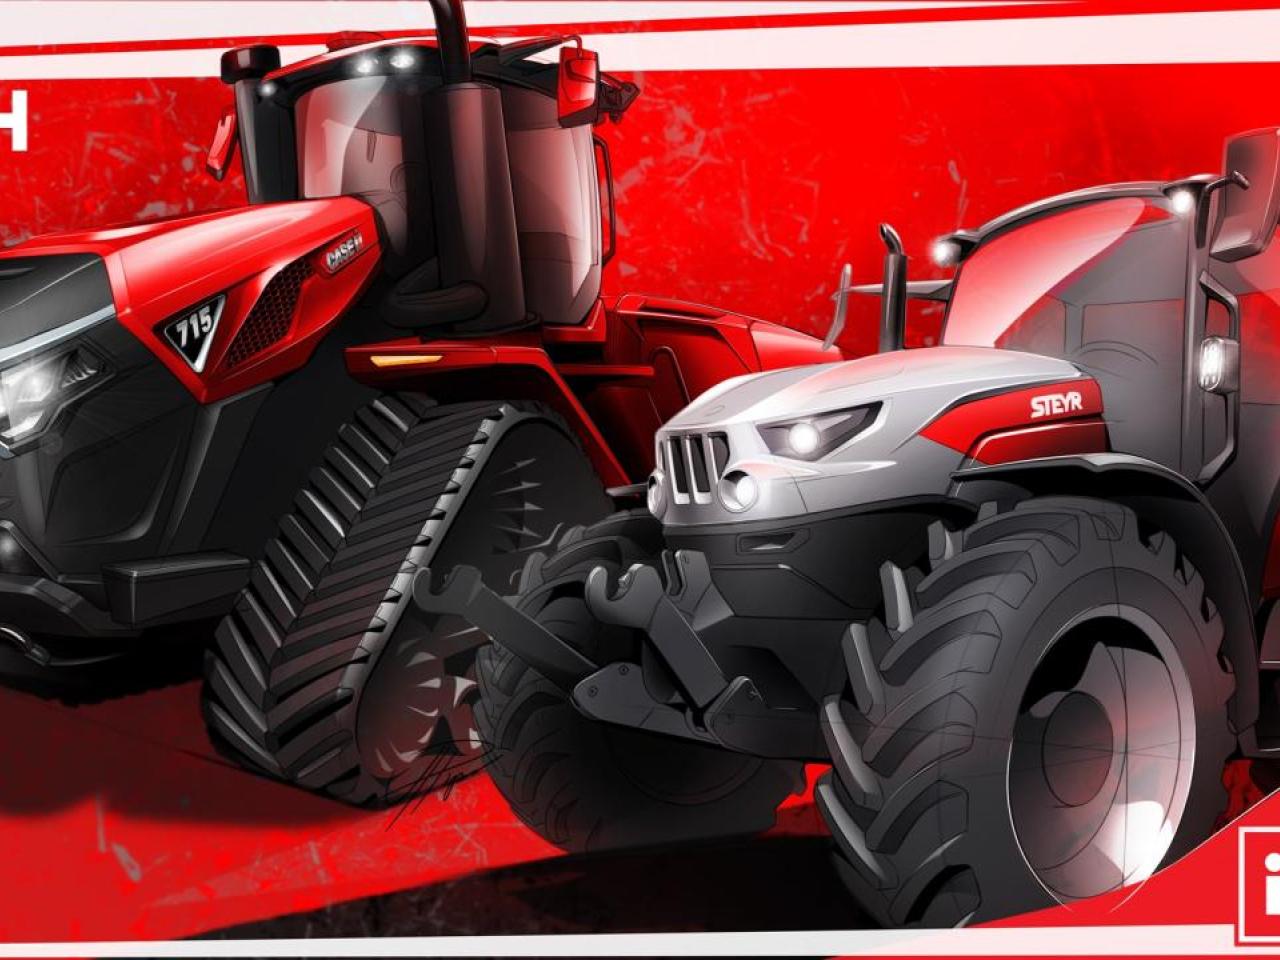 Two large farming tractors, CNH logo